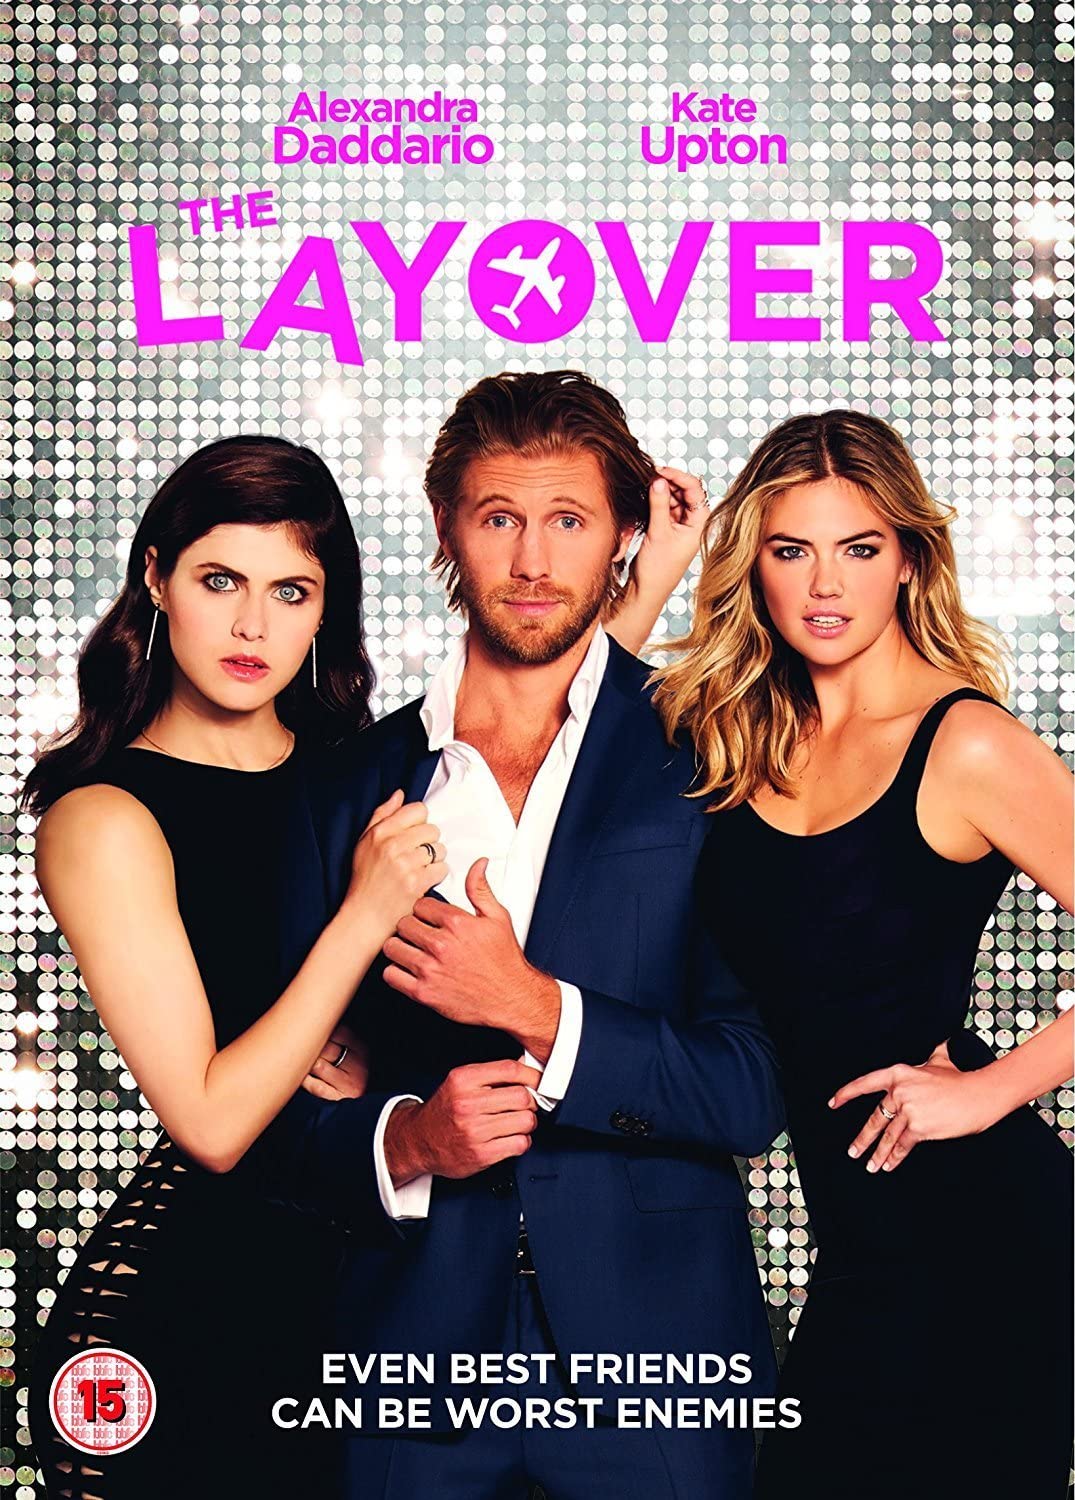 The Layover (DVD)